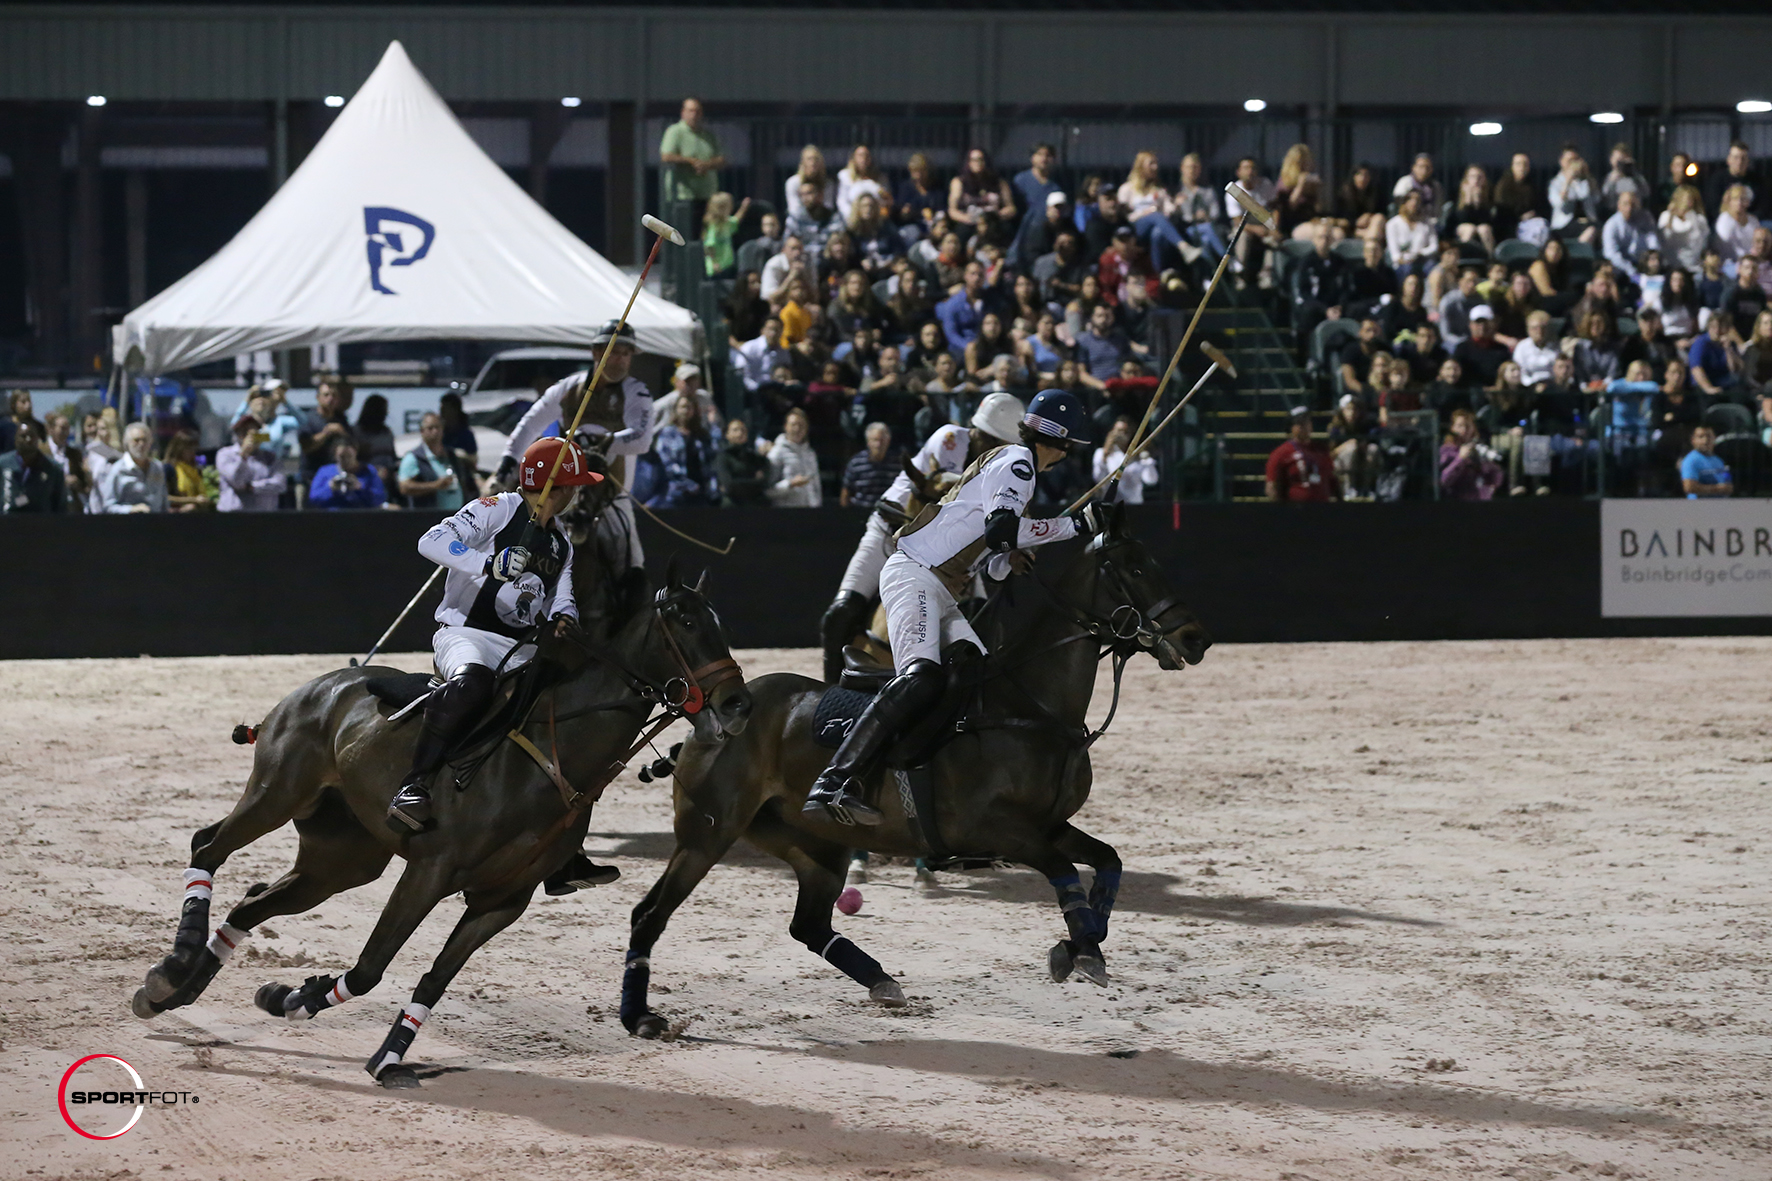 Spartacus Wins $26K in Inaugural Gladiator Polo High-Goal Arena Game